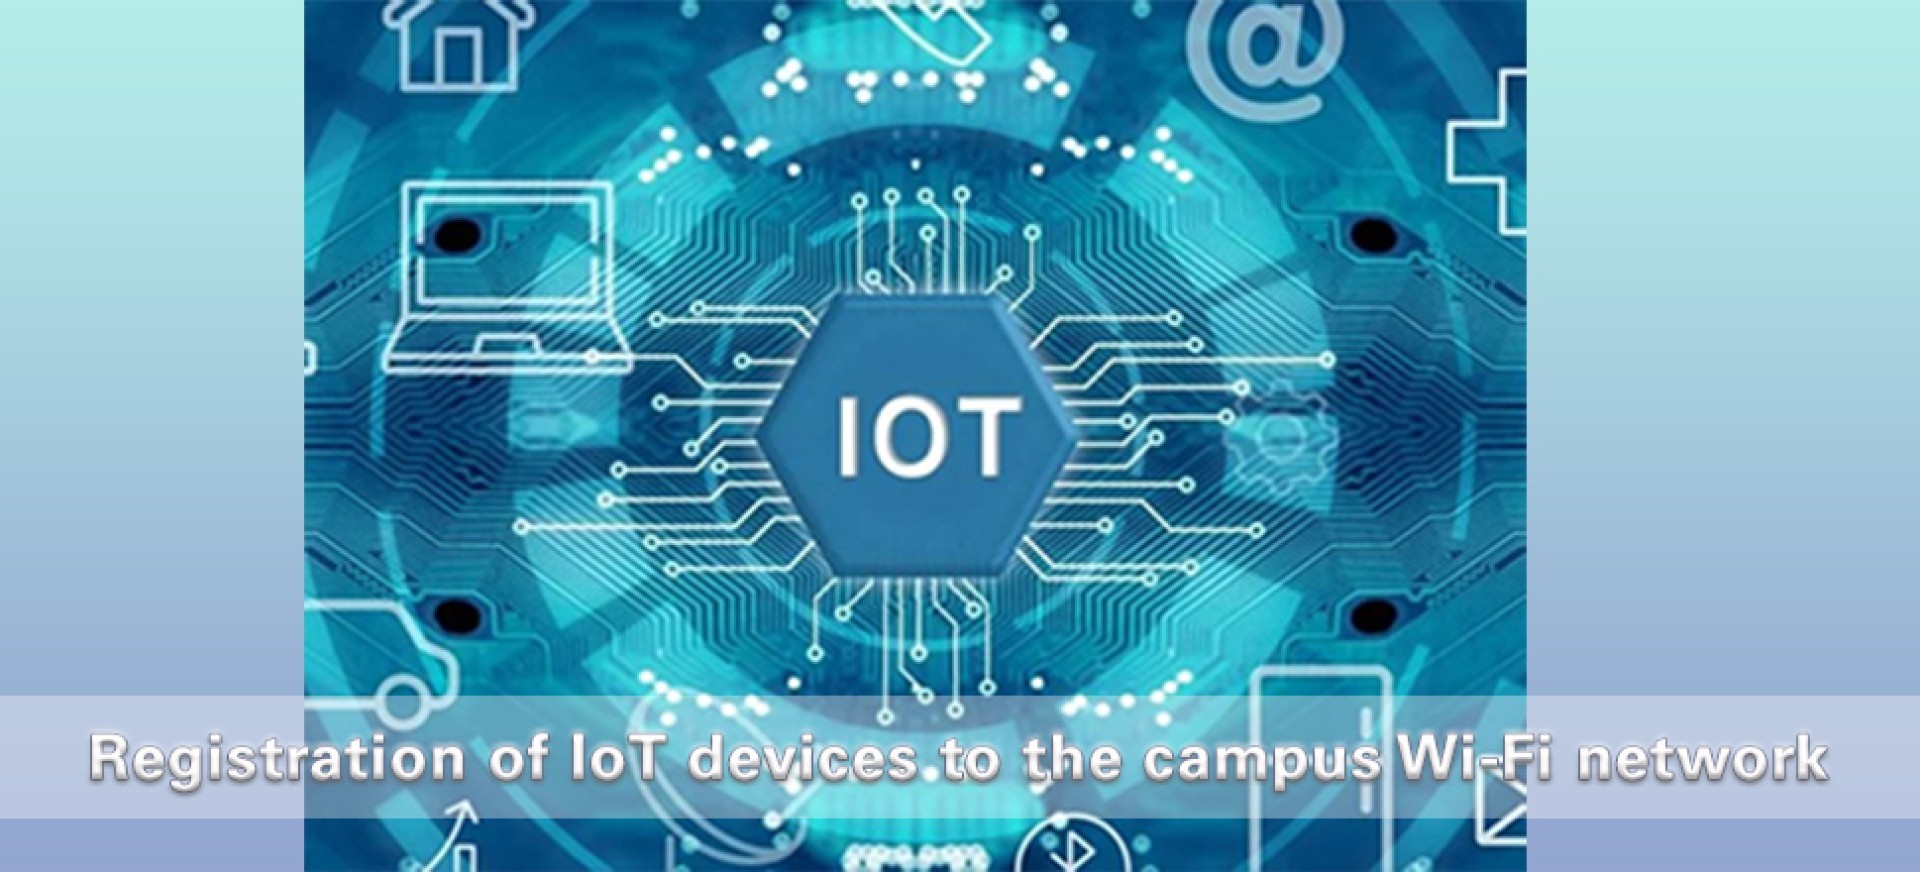 Registration of IoT devices to the campus Wi-Fi network